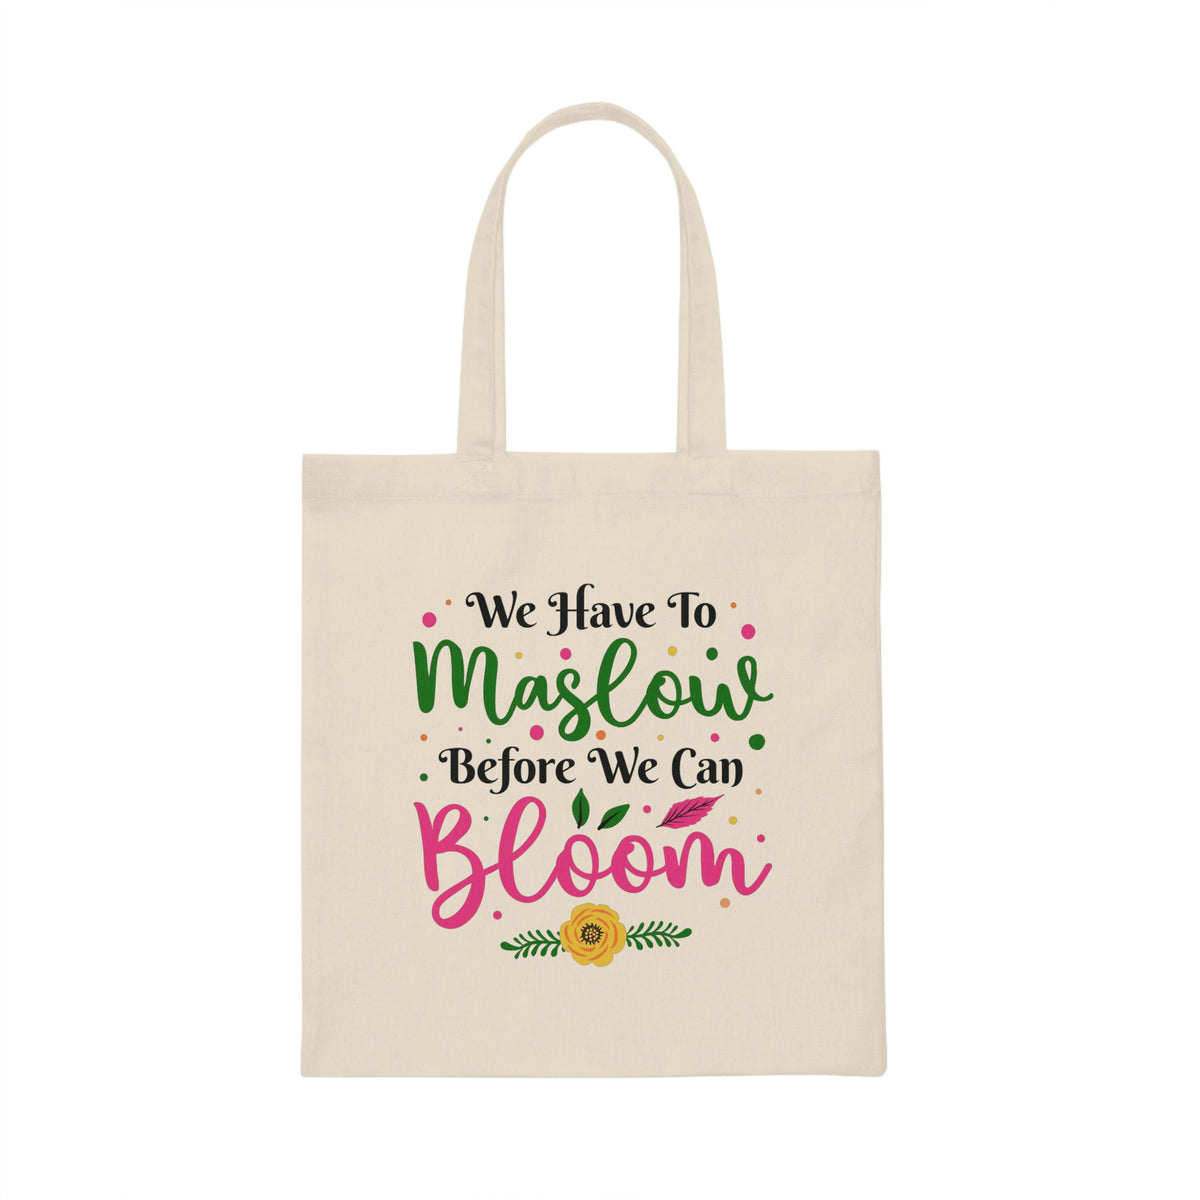 Maslow Before Bloom School Counselor Tote | School Psychology Gift | Canvas Tote Bag